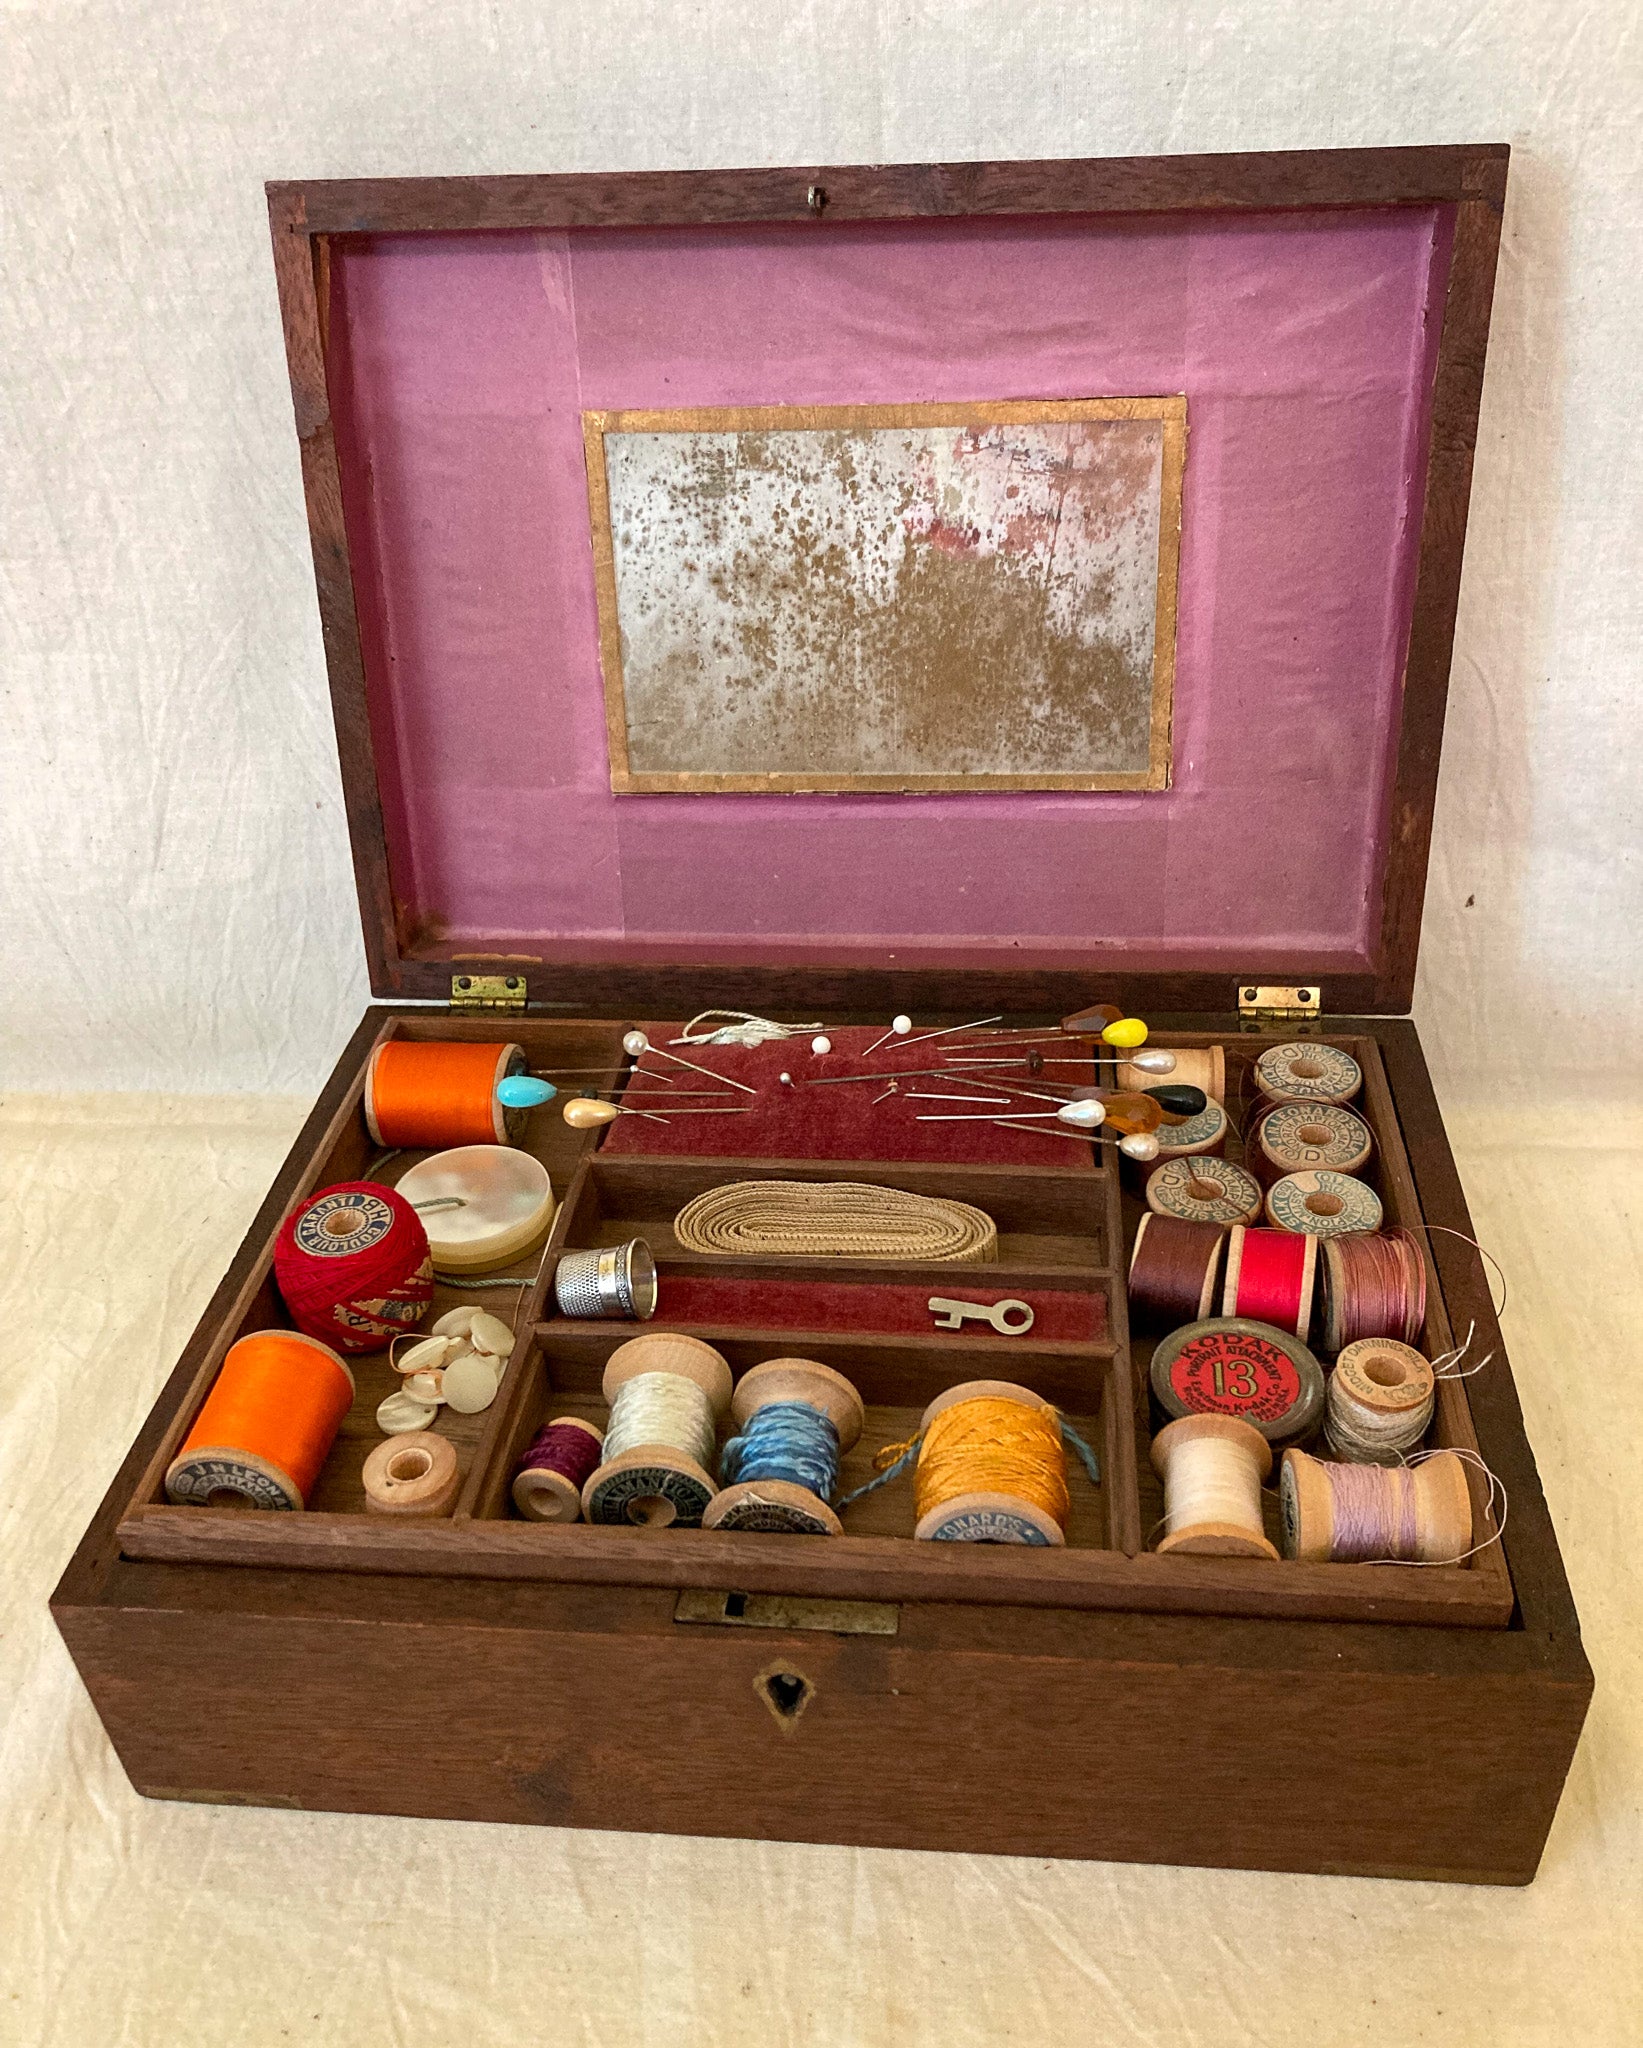 Vintage Sewing Box with Contents!  Sterling Thimble, Silks, Mother of Pearl Buttons and More!